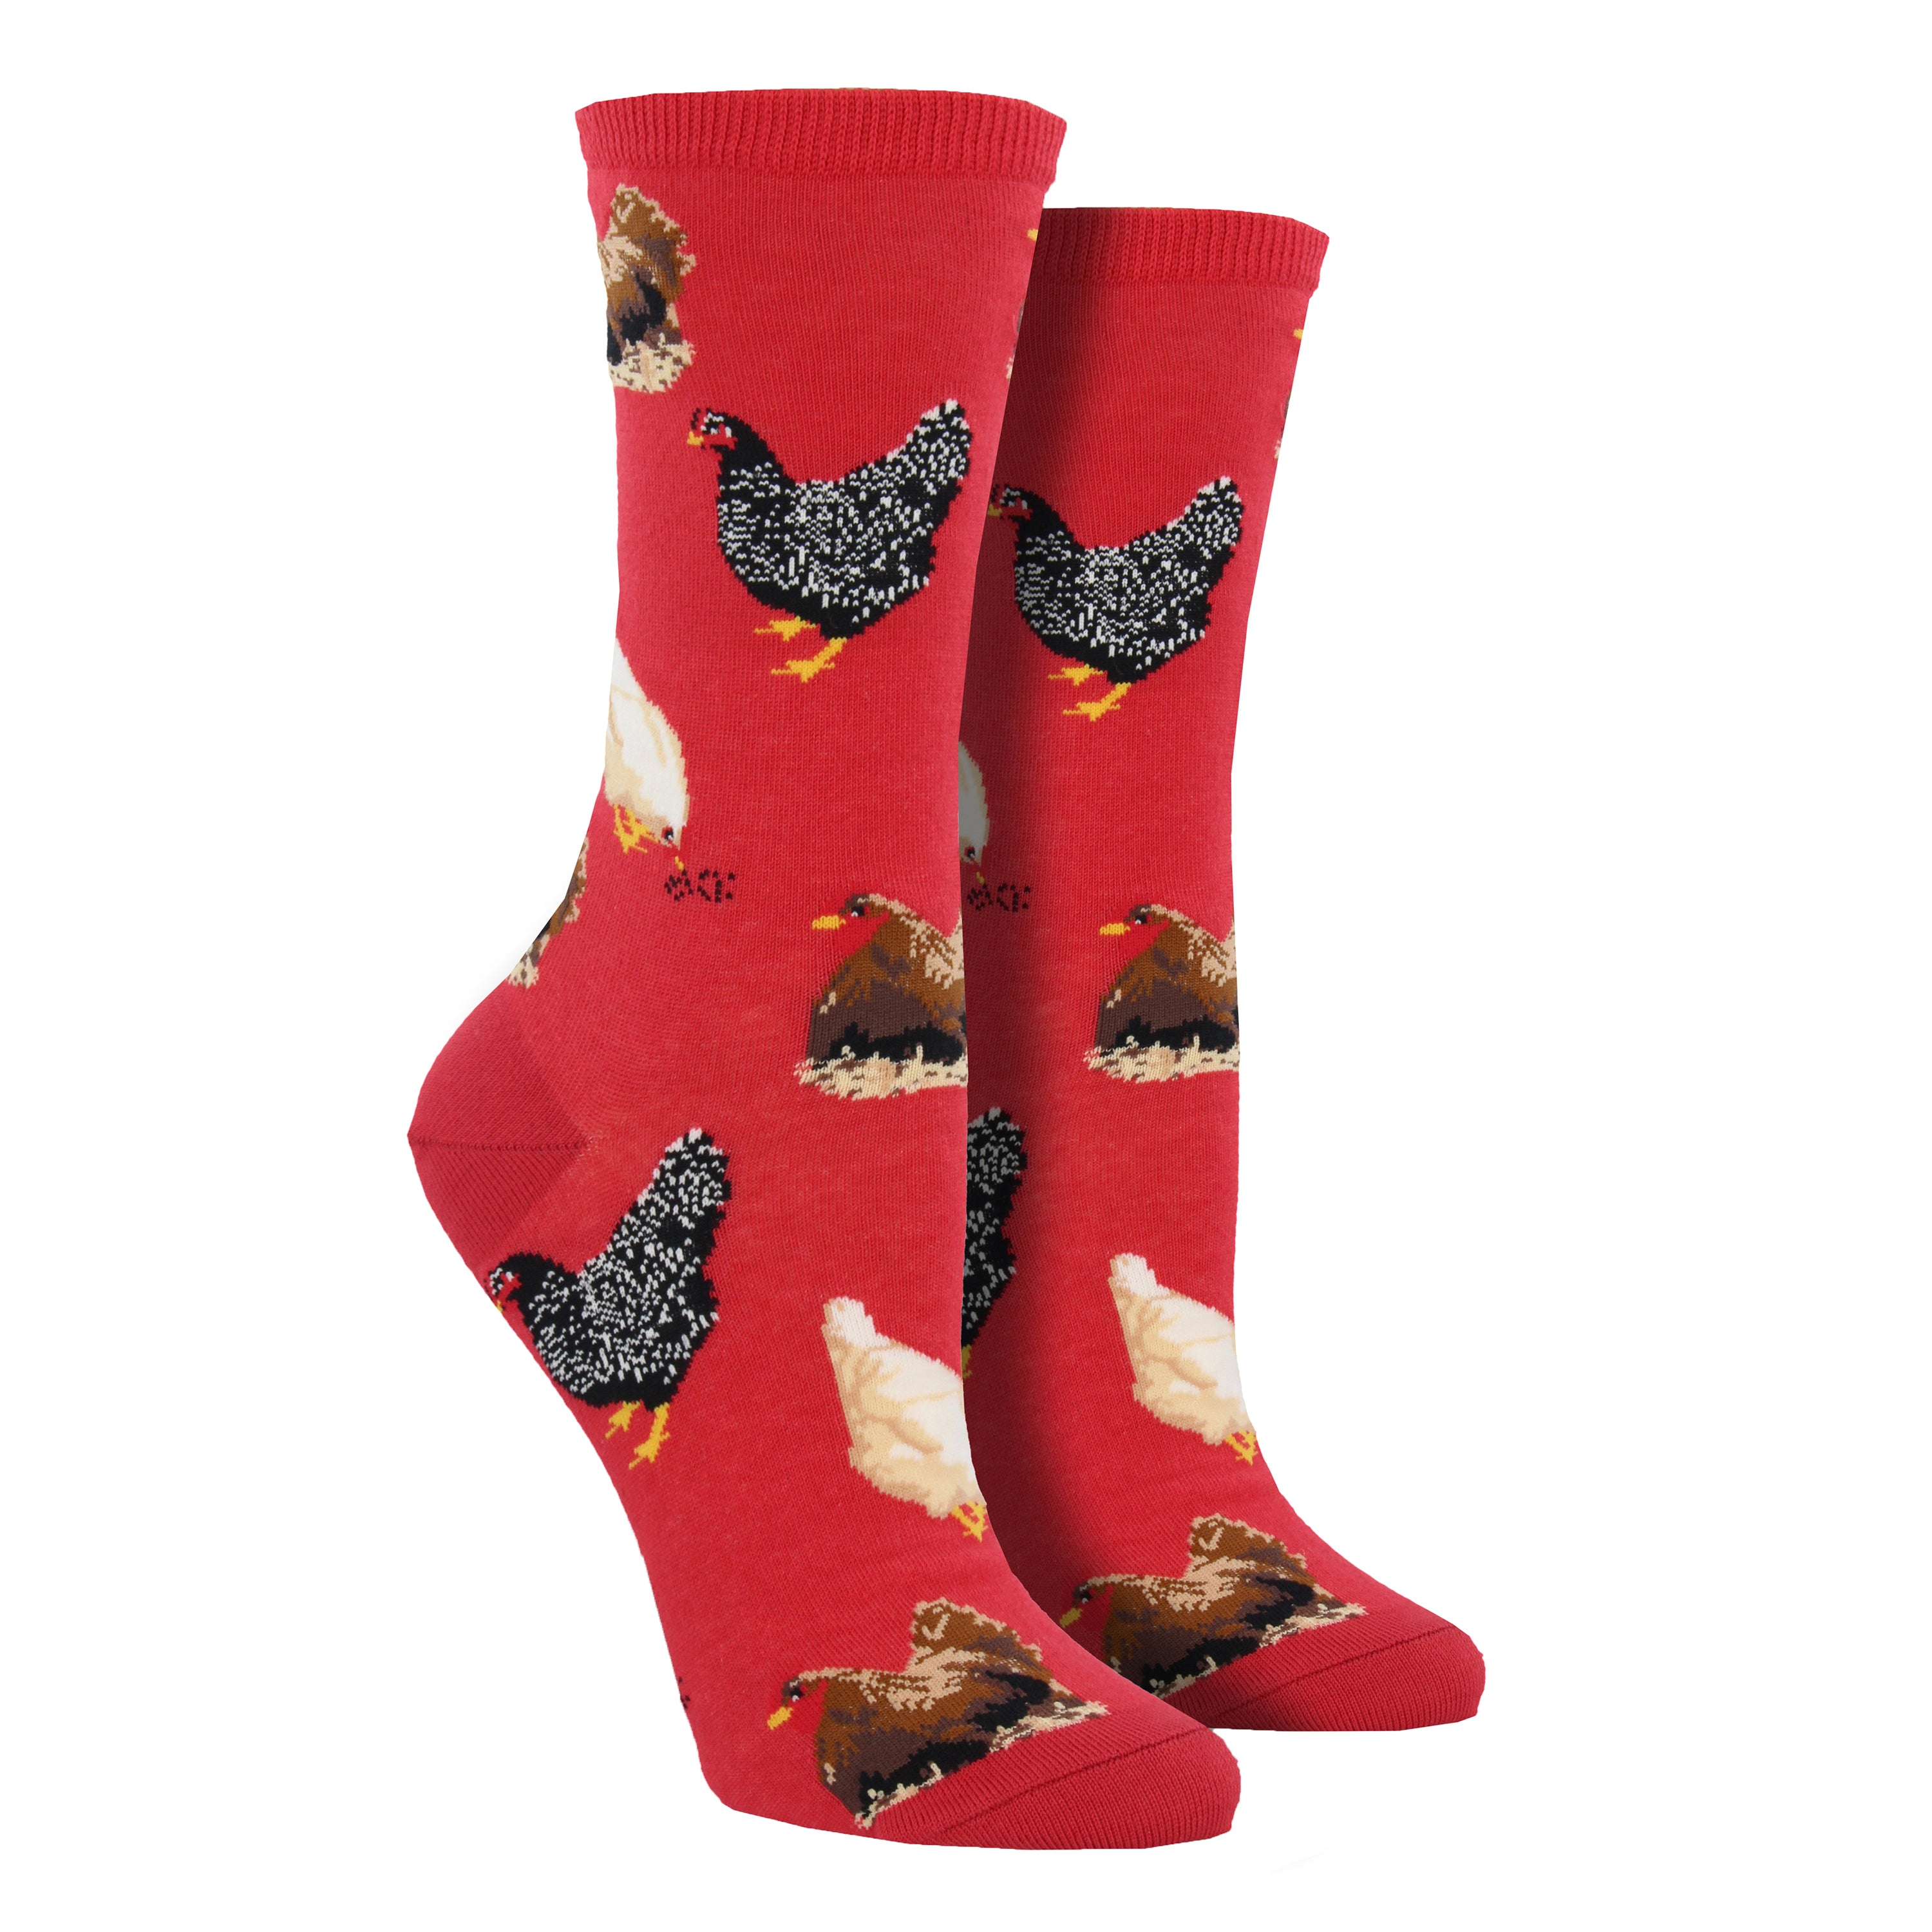 Shown on leg forms, a pair of Socksmith brand women's cotton crew sock in red with multi-colored hens all over the sock.